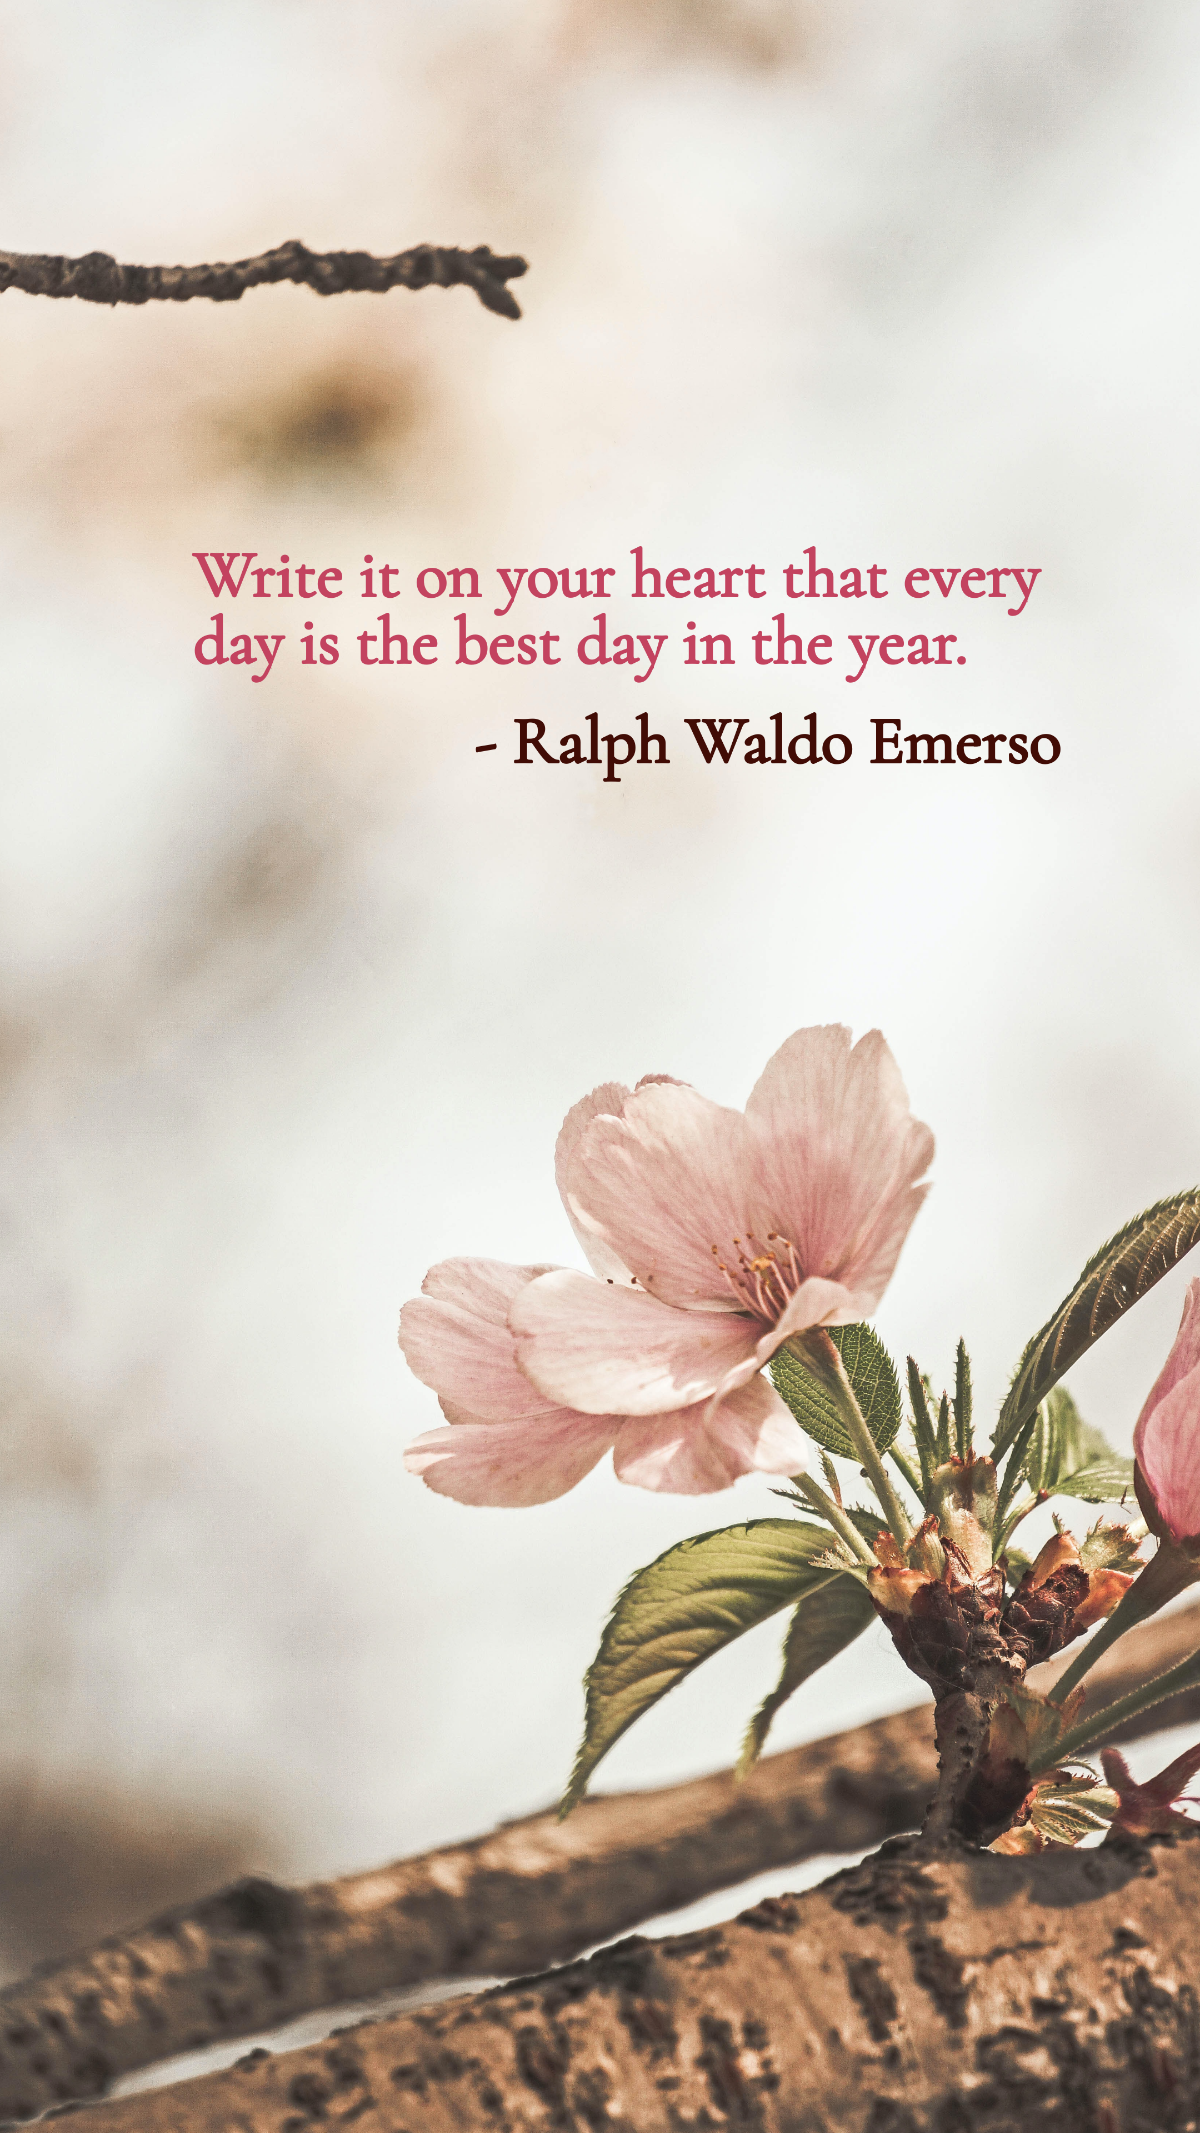 Free Write it on your heart that every day is the best day in the year. Template